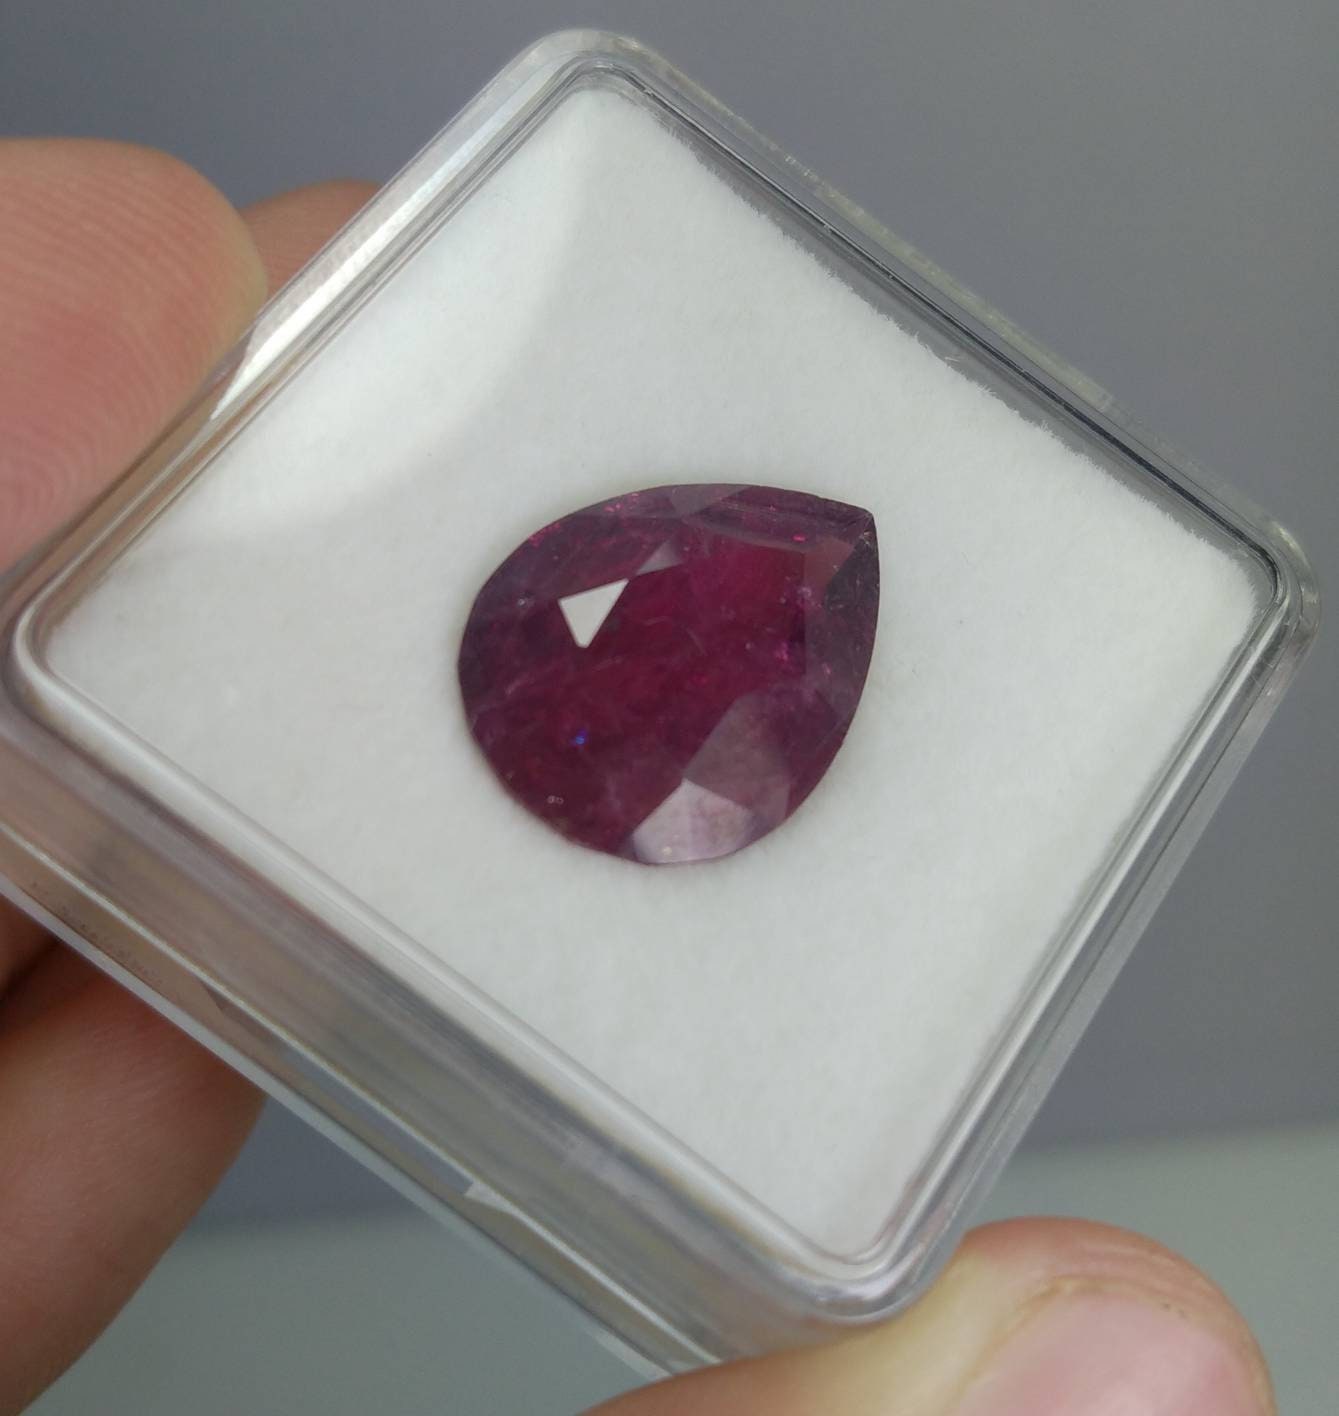 ARSAA GEMS AND MINERALSTop Quality beautiful natural 11 carat faceted pear shape rubellite gem - Premium  from ARSAA GEMS AND MINERALS - Just $110.00! Shop now at ARSAA GEMS AND MINERALS